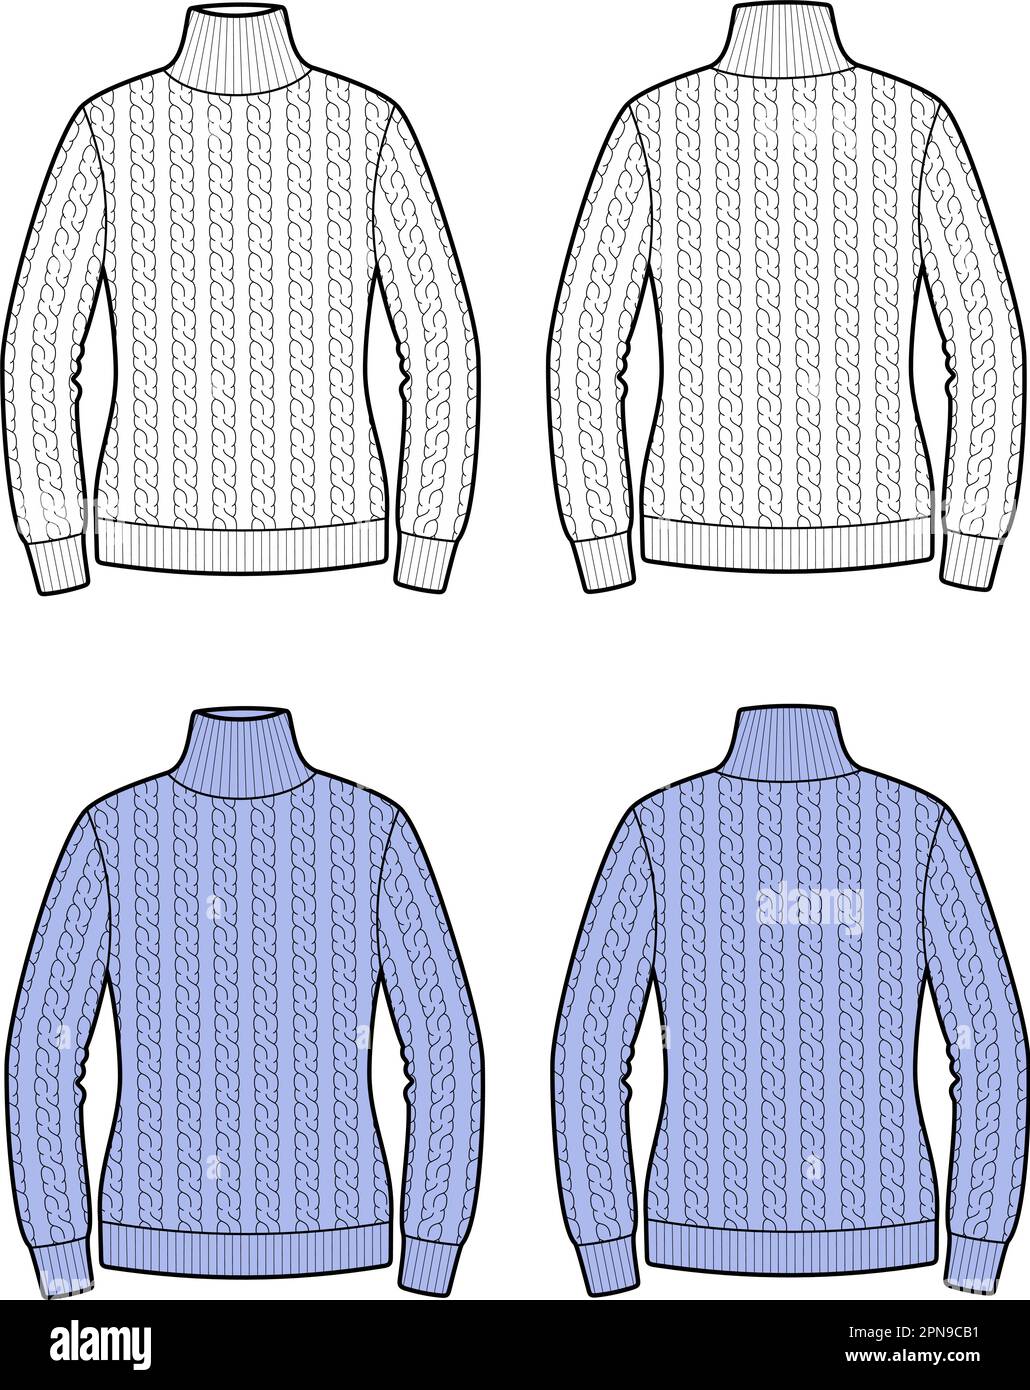 Womens knitted sweater. Front and back. Stock Vector